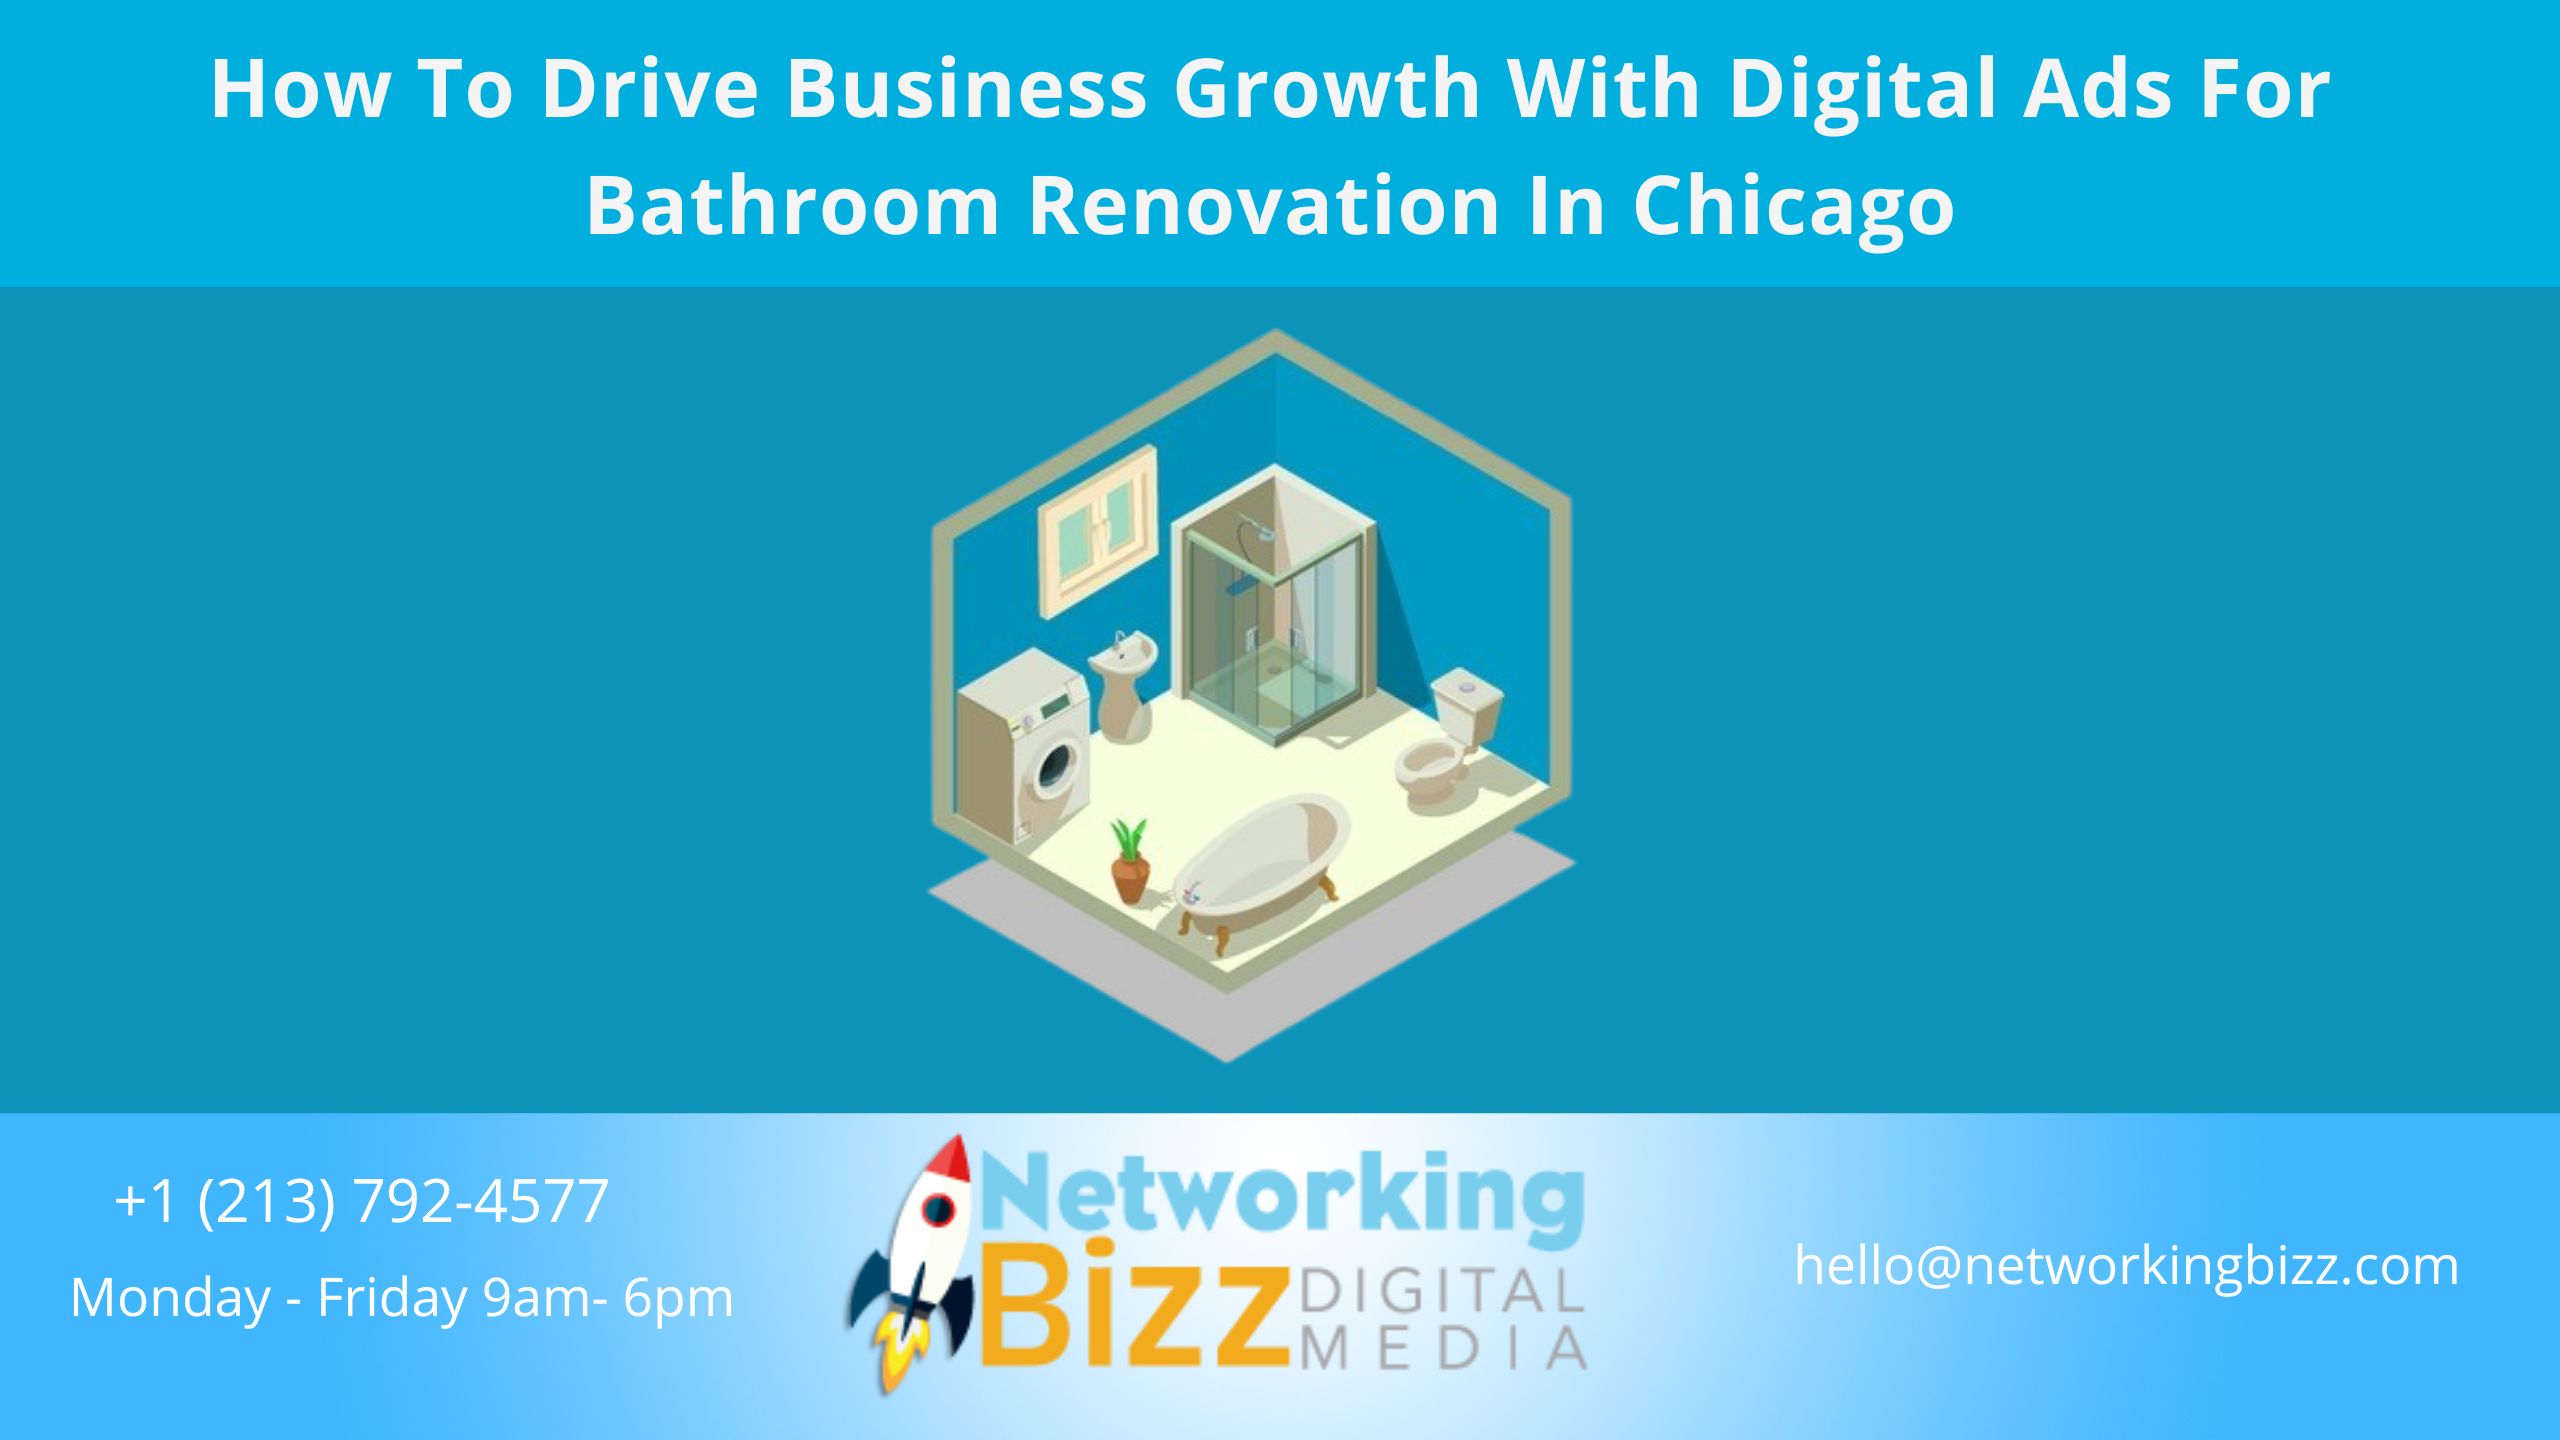 How To Drive Business Growth With Digital Ads For Bathroom Renovation In Chicago